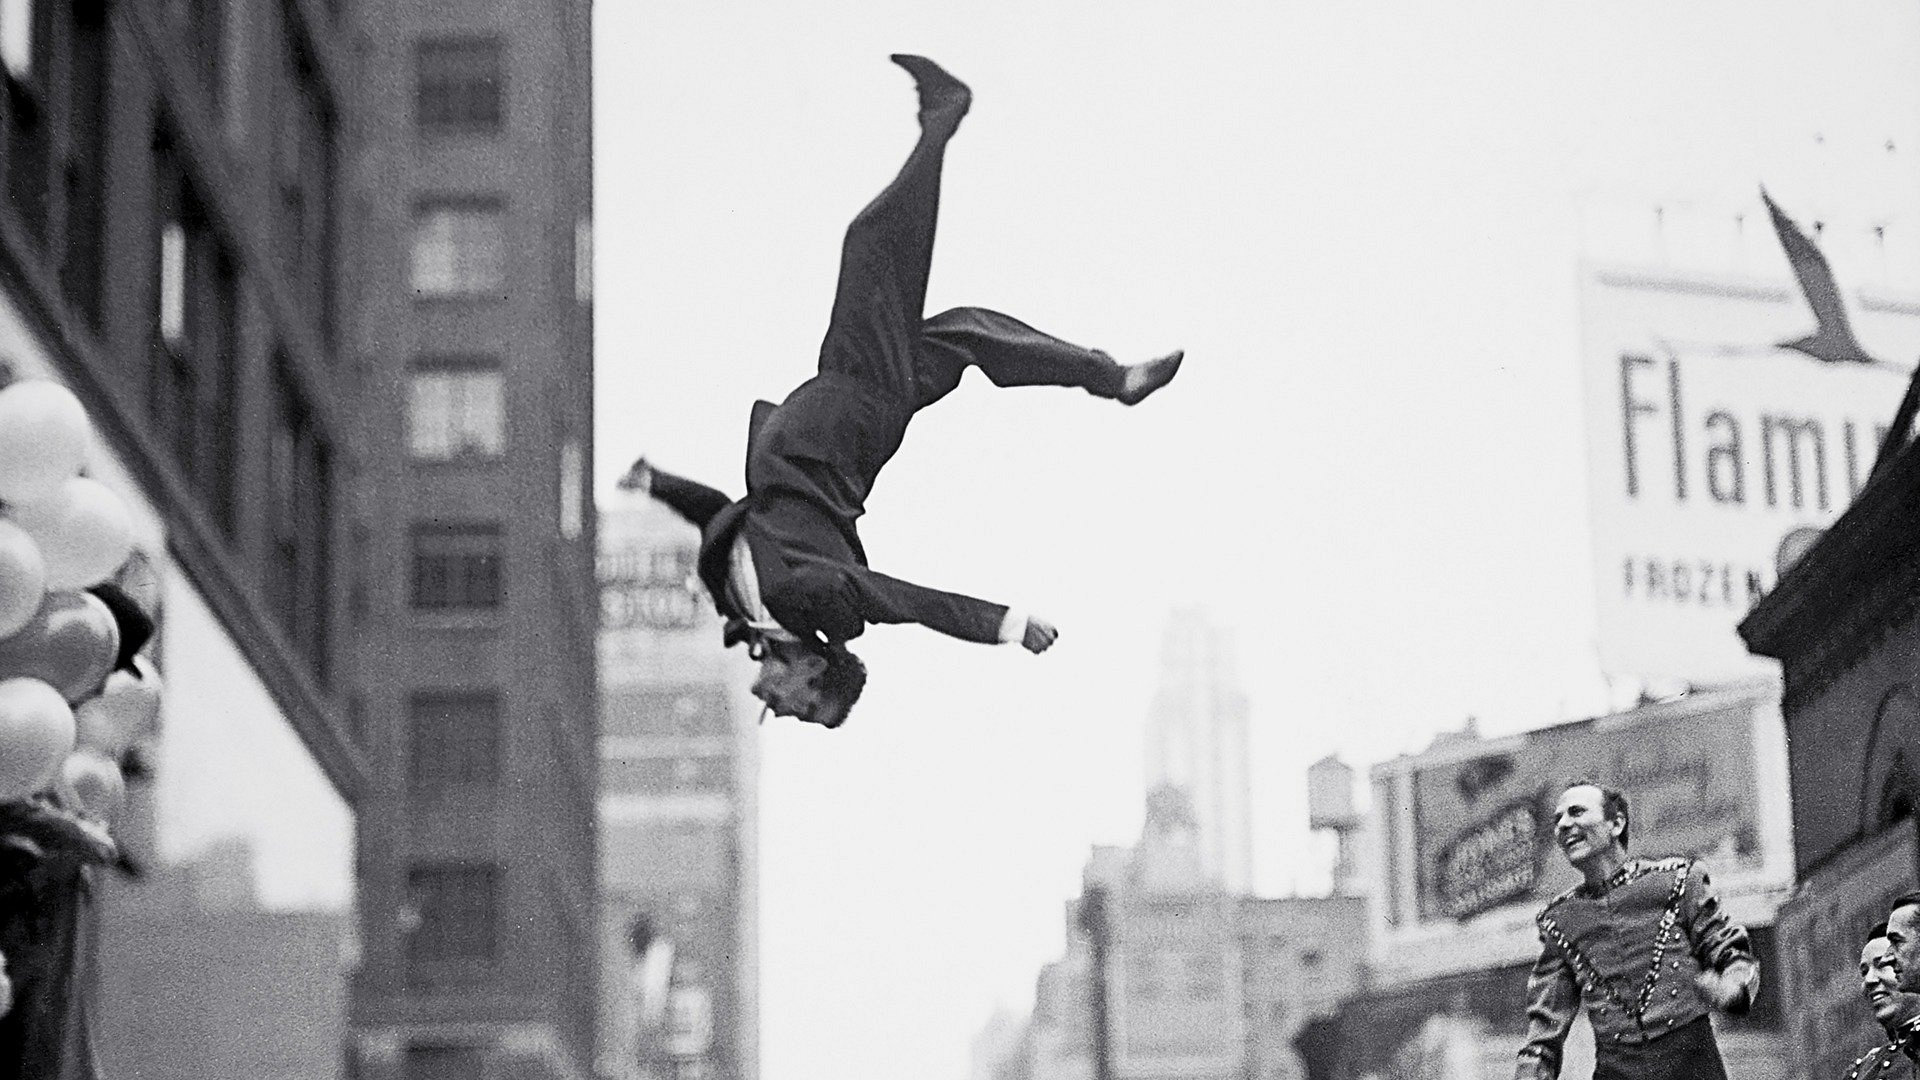 Garry Winogrand: All things are photographable